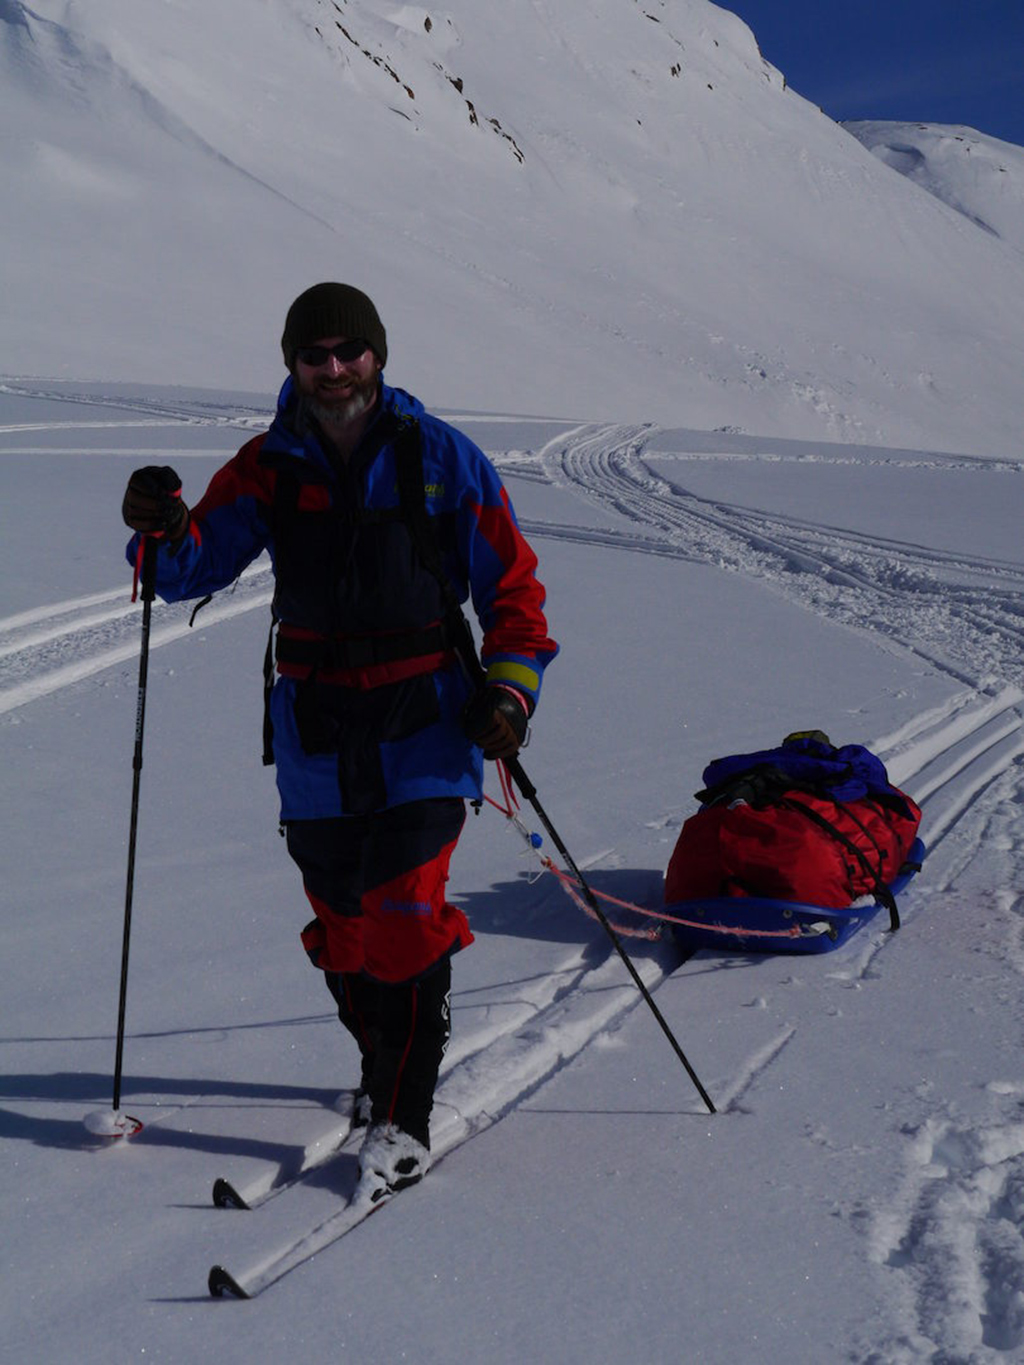 Craig Mathieson on an expedition in Greenland